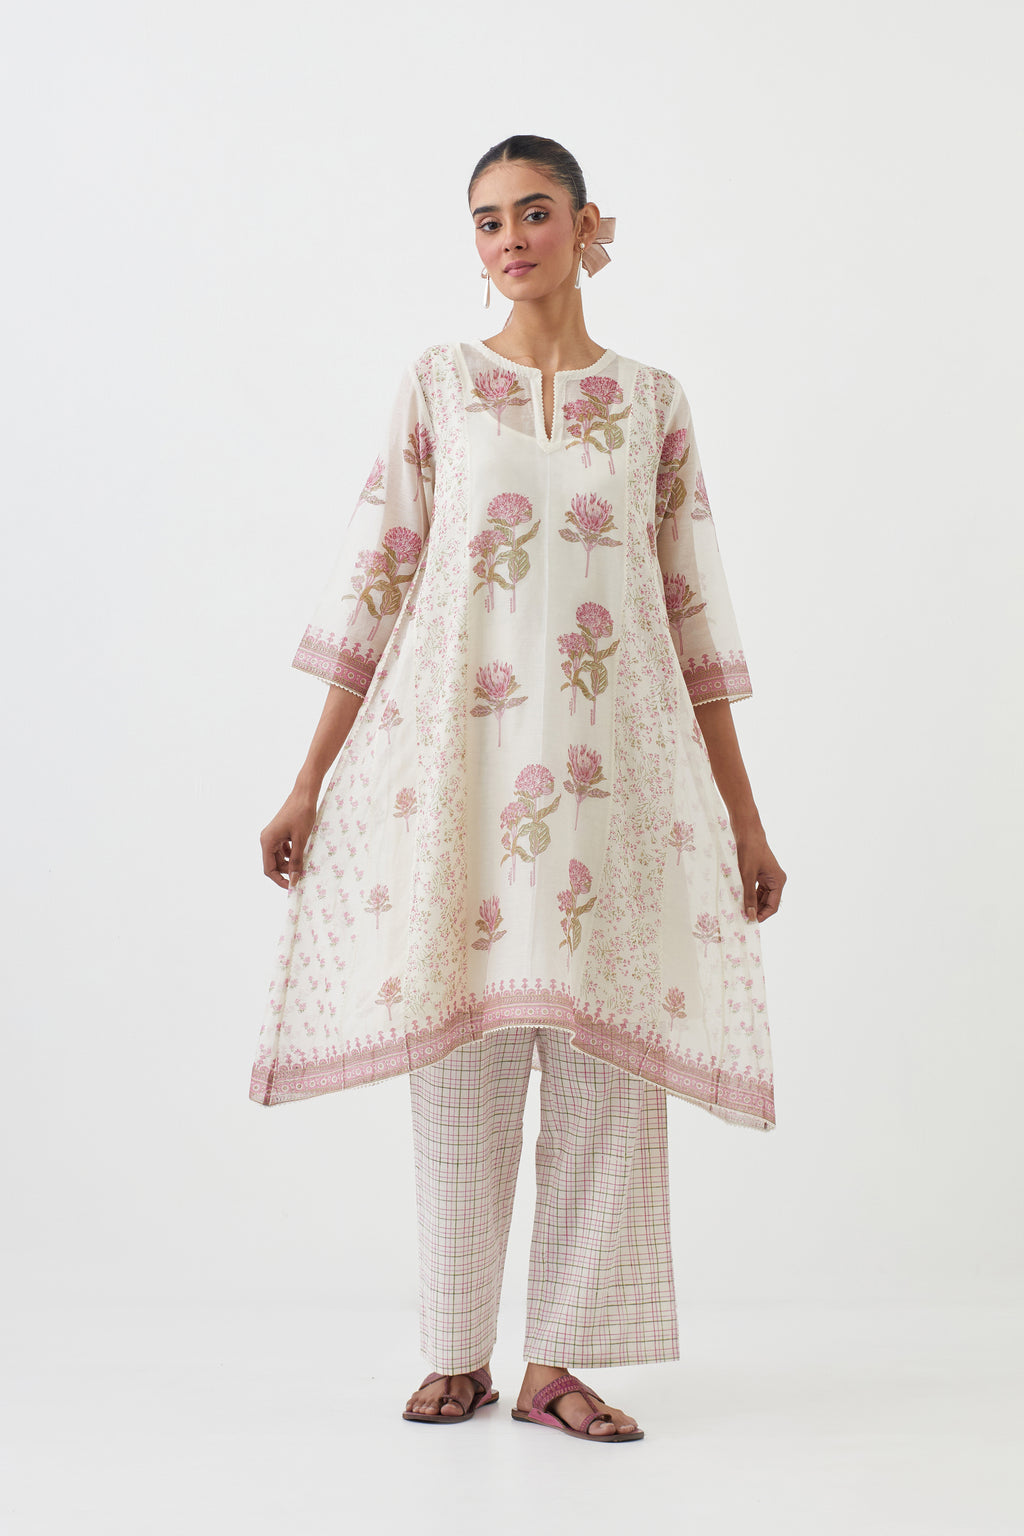 Off white hand block printed cotton chanderi short kalidar kurta set with all-over pink colored flower.